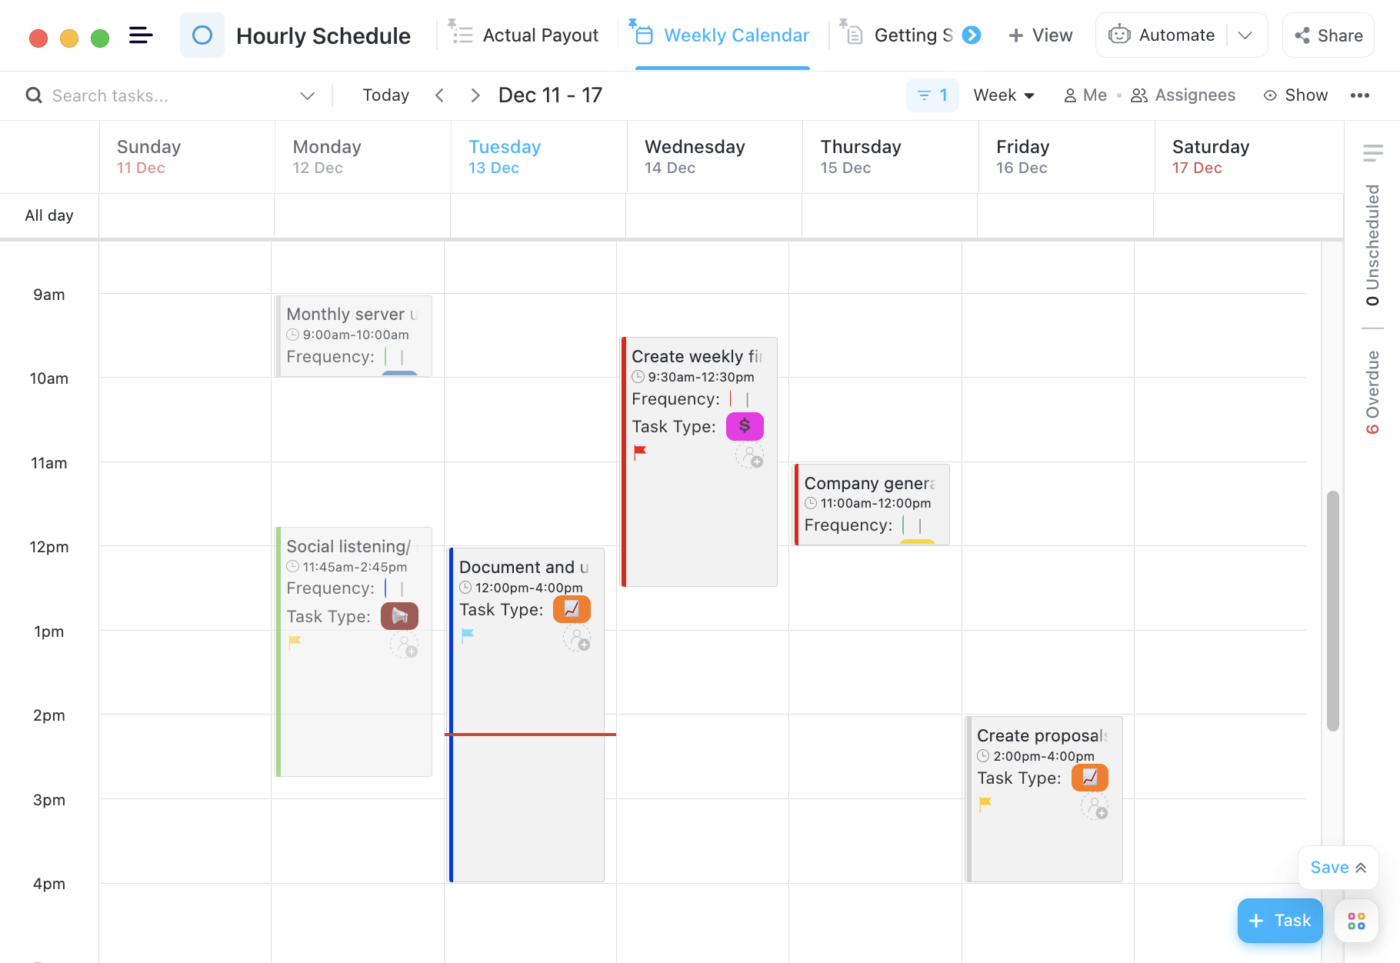 Hourly Schedule Template by ClickUp